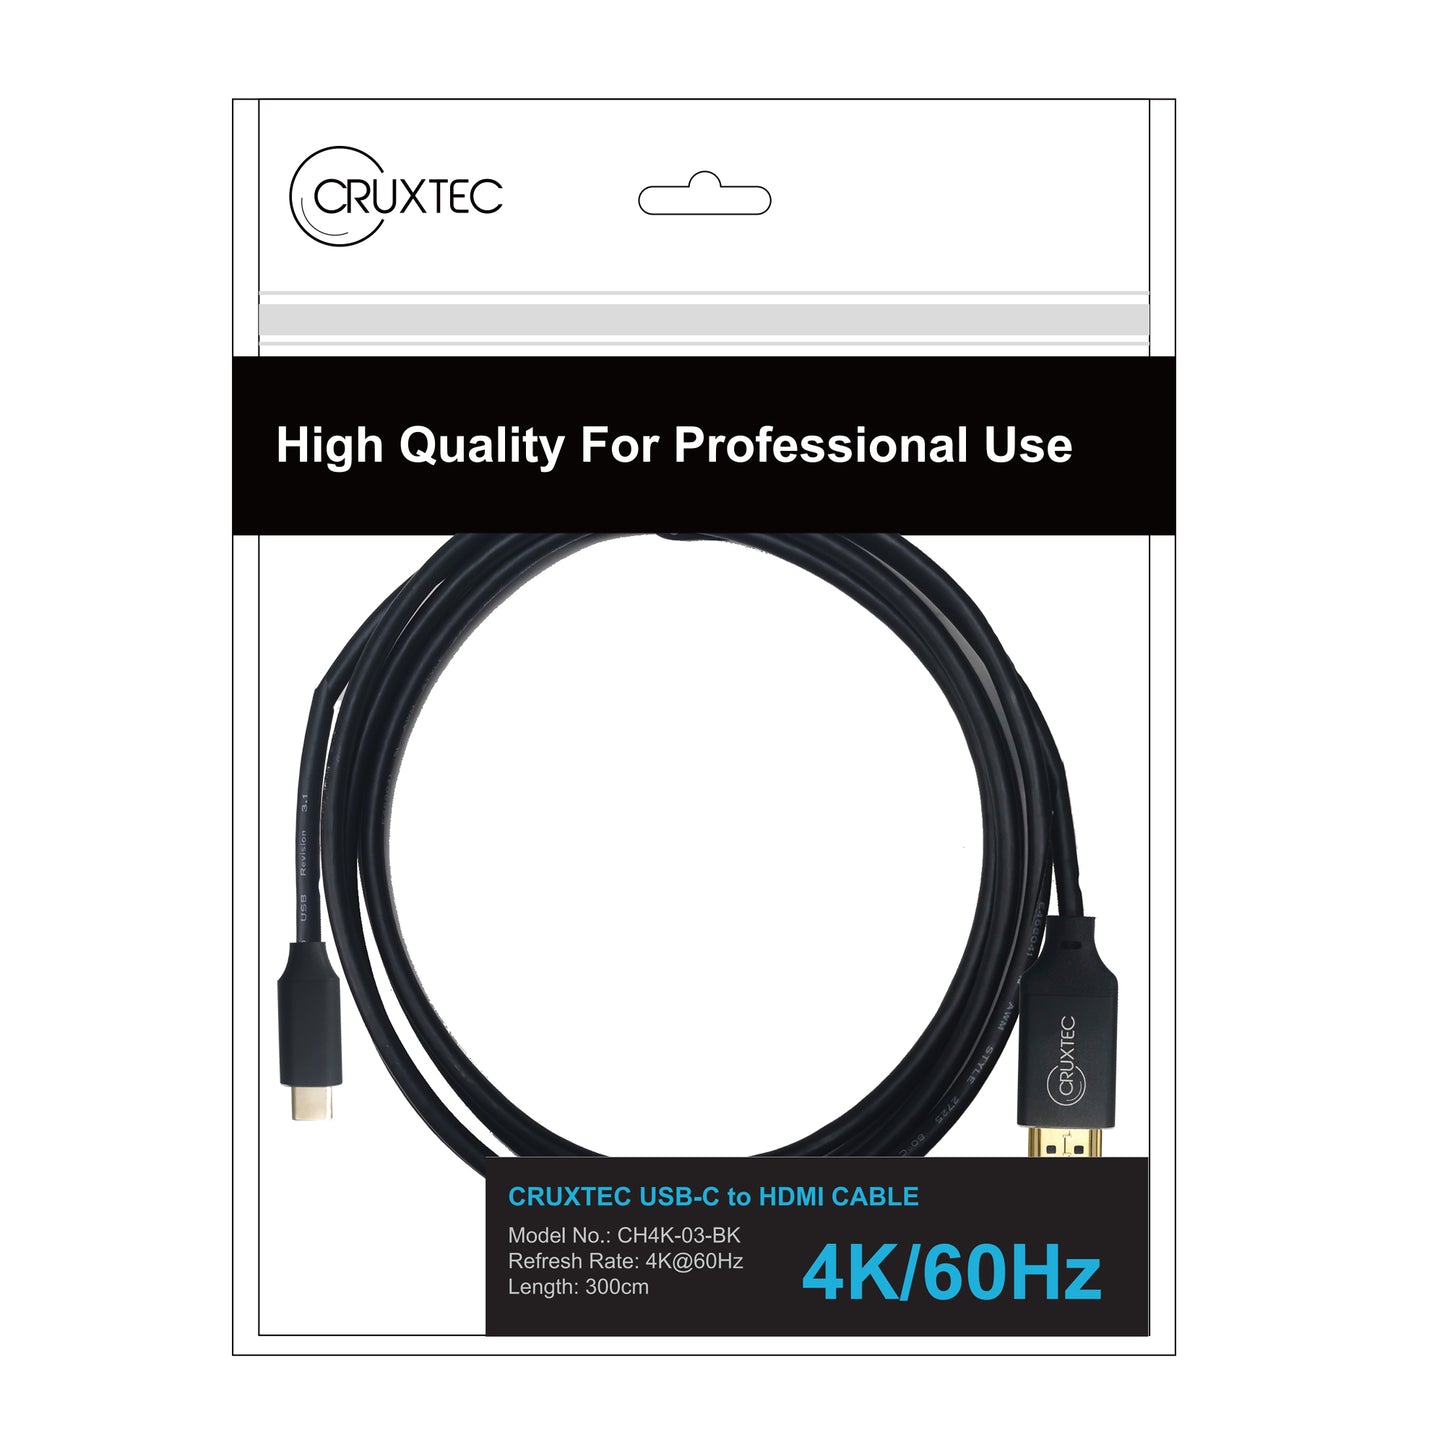 Cruxtec USB-C to HDMI 2.0 Cable 4K/60Hz Support HDR